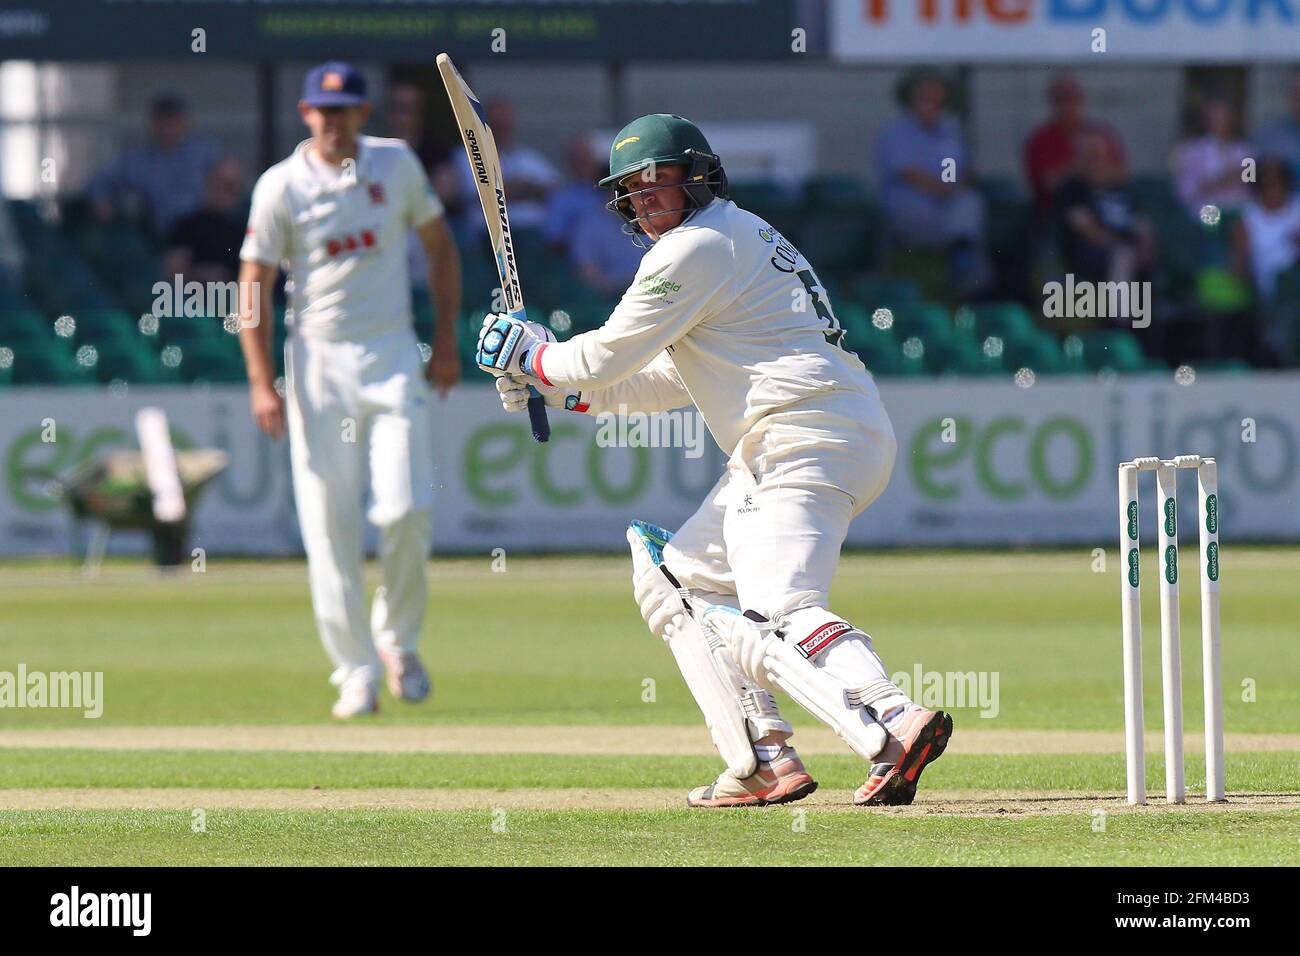 Mark Cosgrove in batting action for Leicestershire during Leicestershire CCC vs Essex CCC, Specsavers County Championship Division 2 Cricket at the Fi Stock Photo